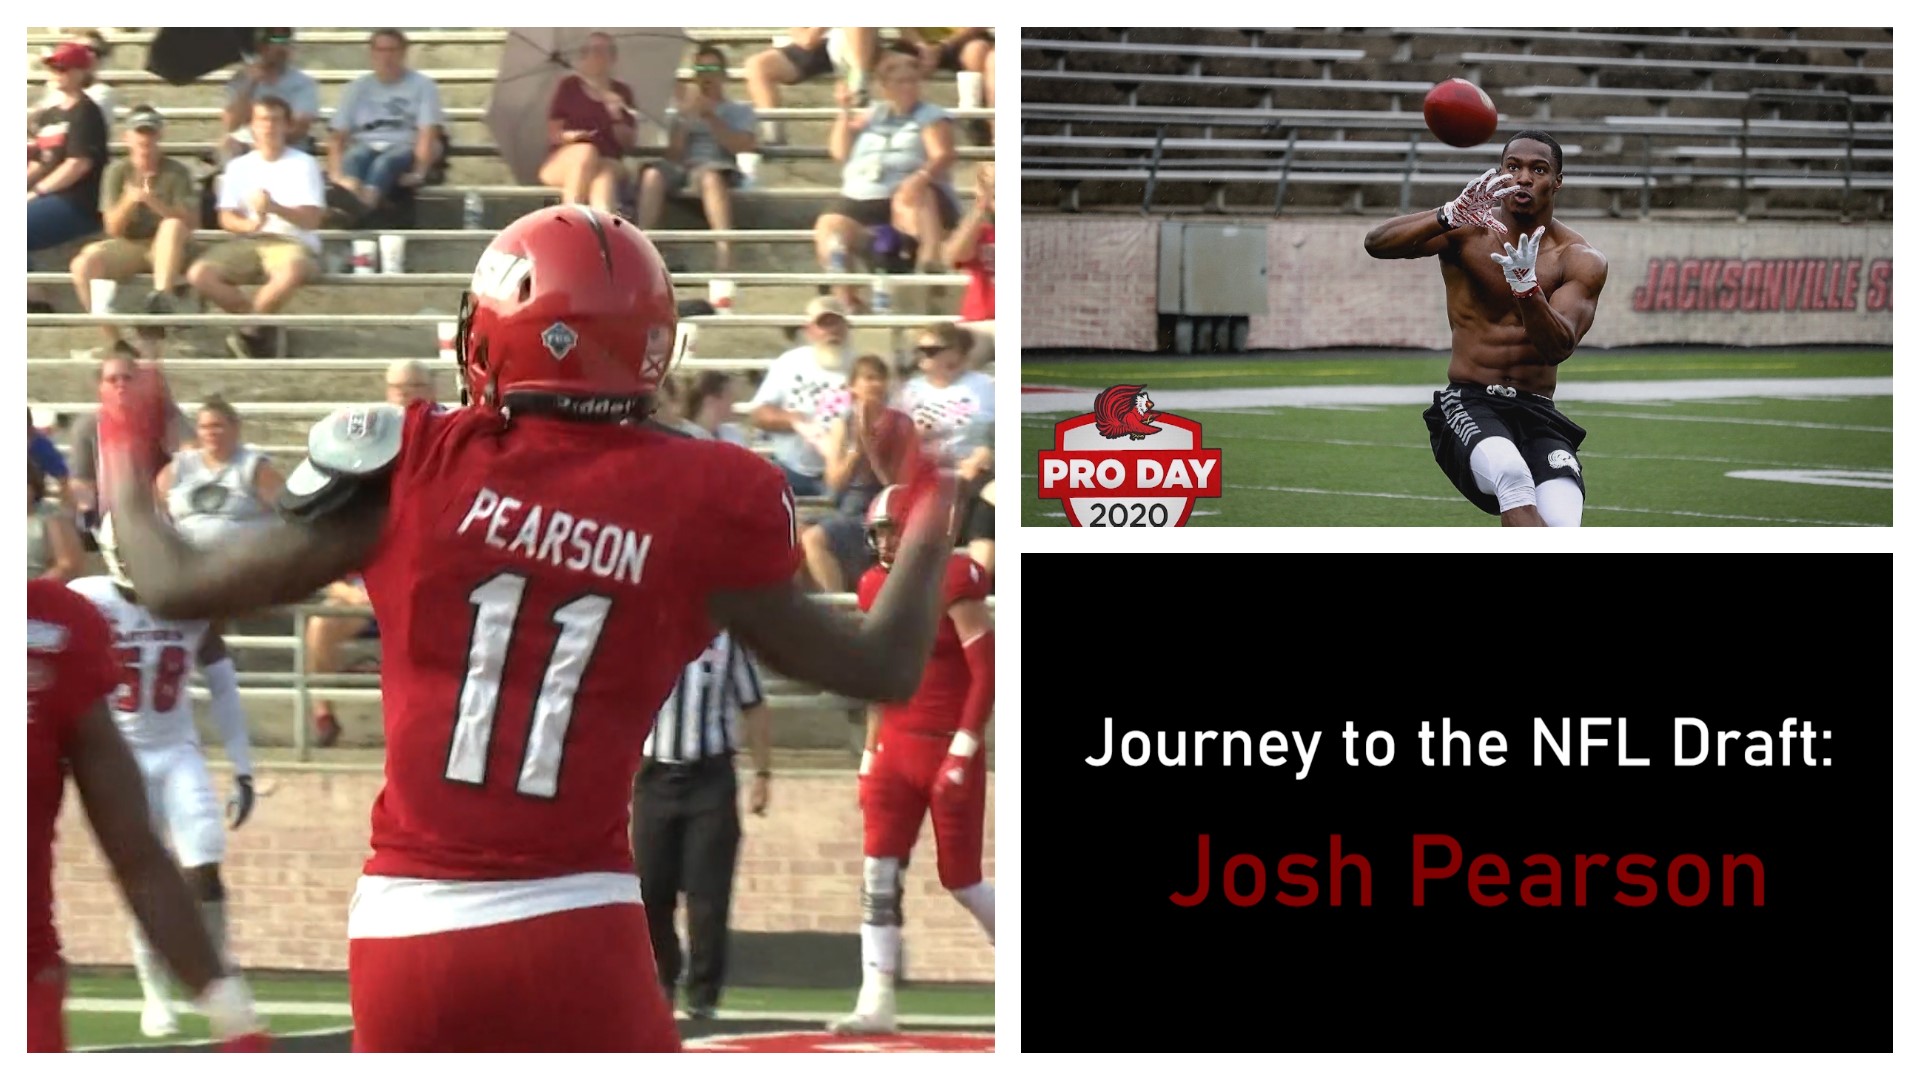 Decatur native Josh Pearson has had quite journey from his time at Austin High to Jacksonville State. Now he's preparing for the NFL Draft.